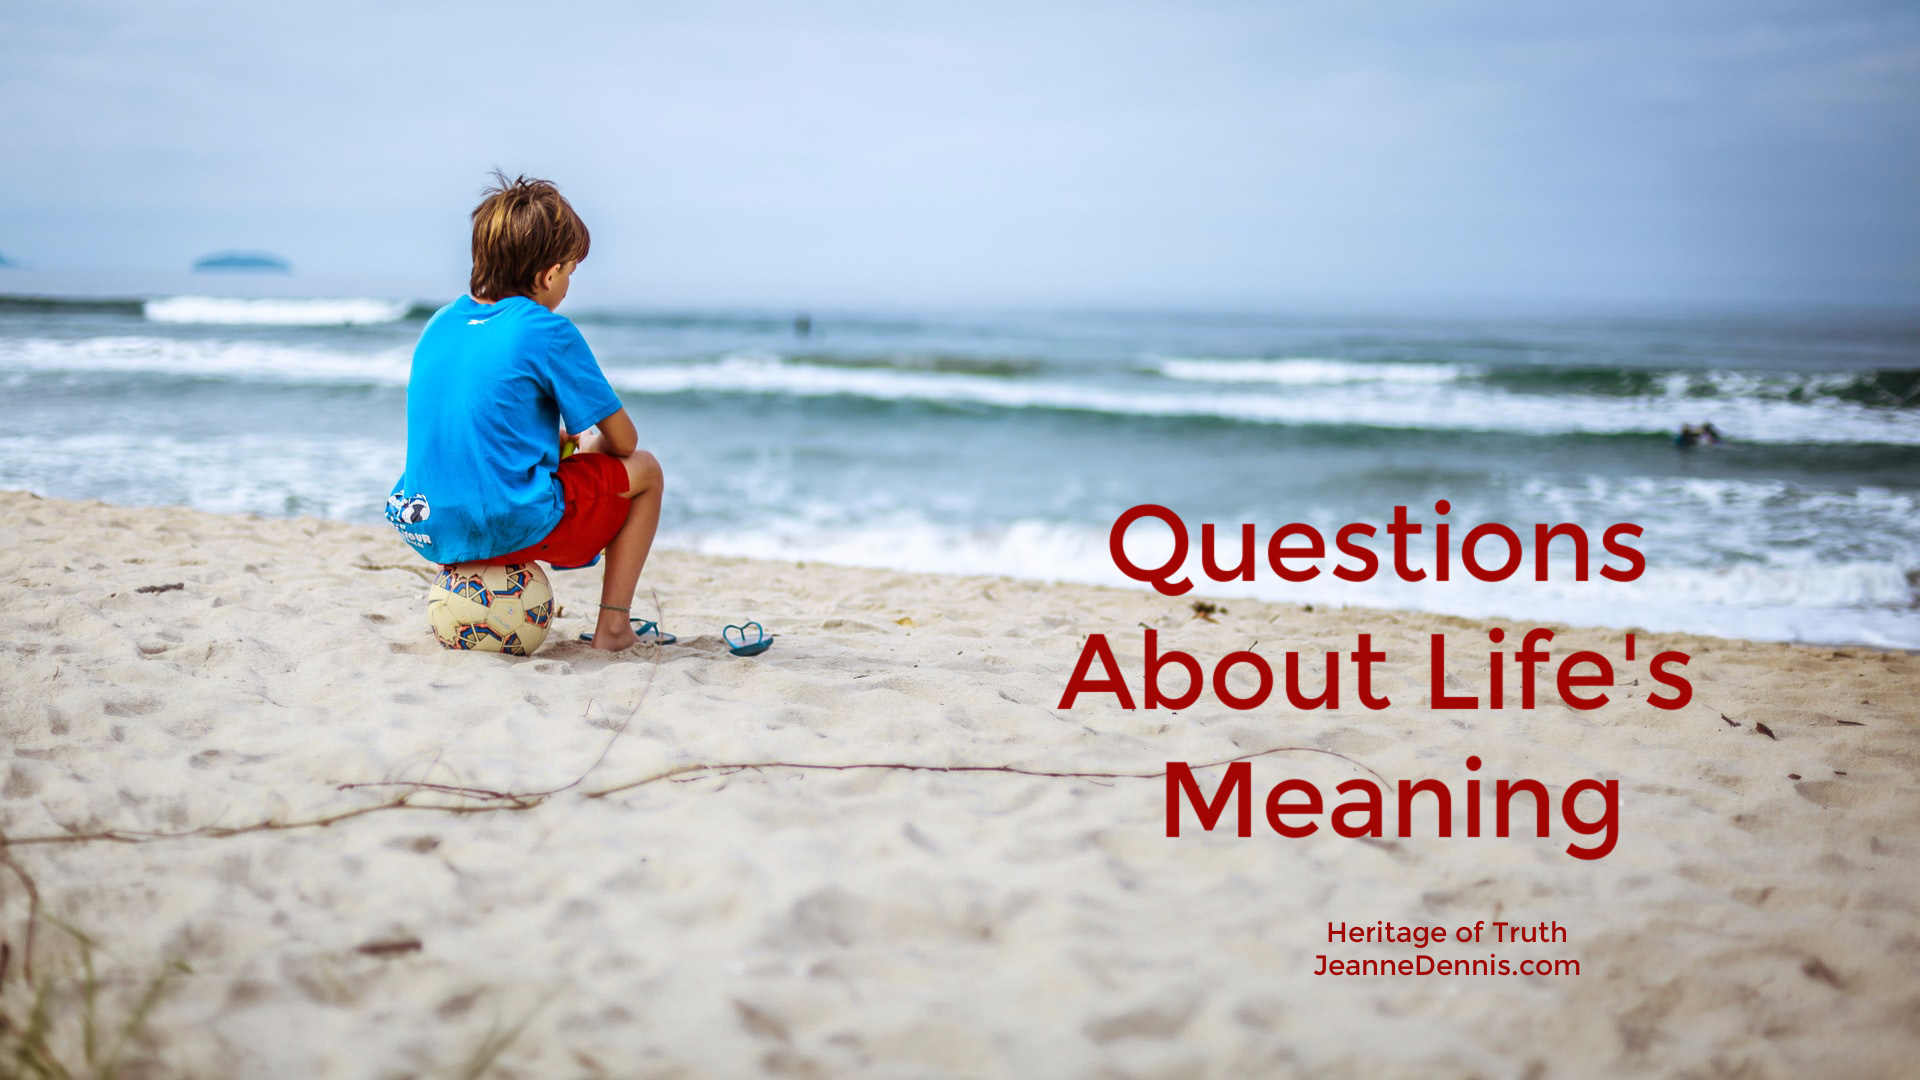 Questions about life's meaning, Where did I come from? Why am I here? Heritage of Truth, JeanneDennis.com